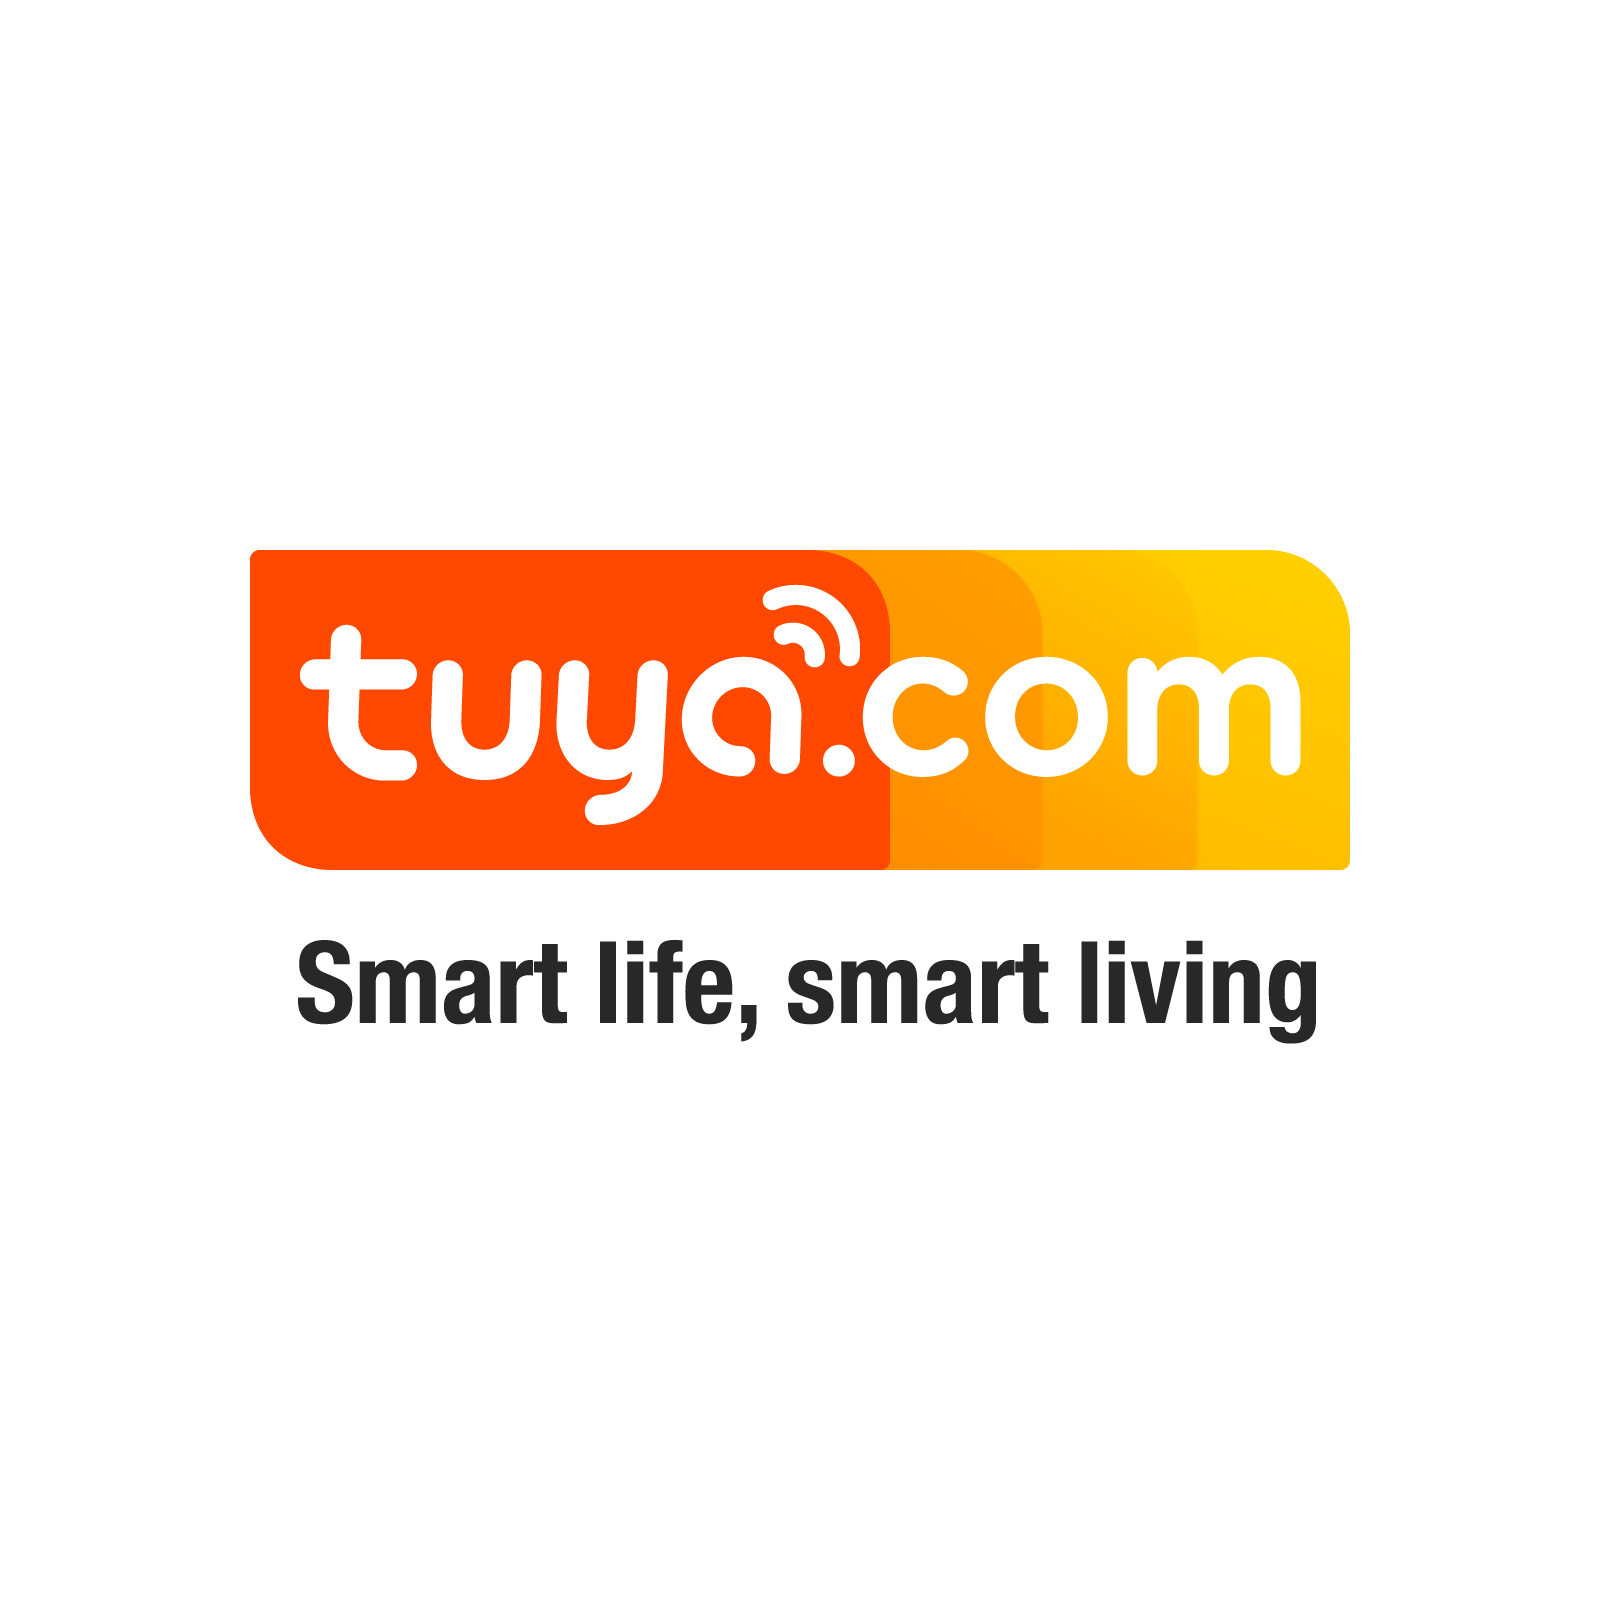 Tuya Smart announces Global Brand Empowering Project at